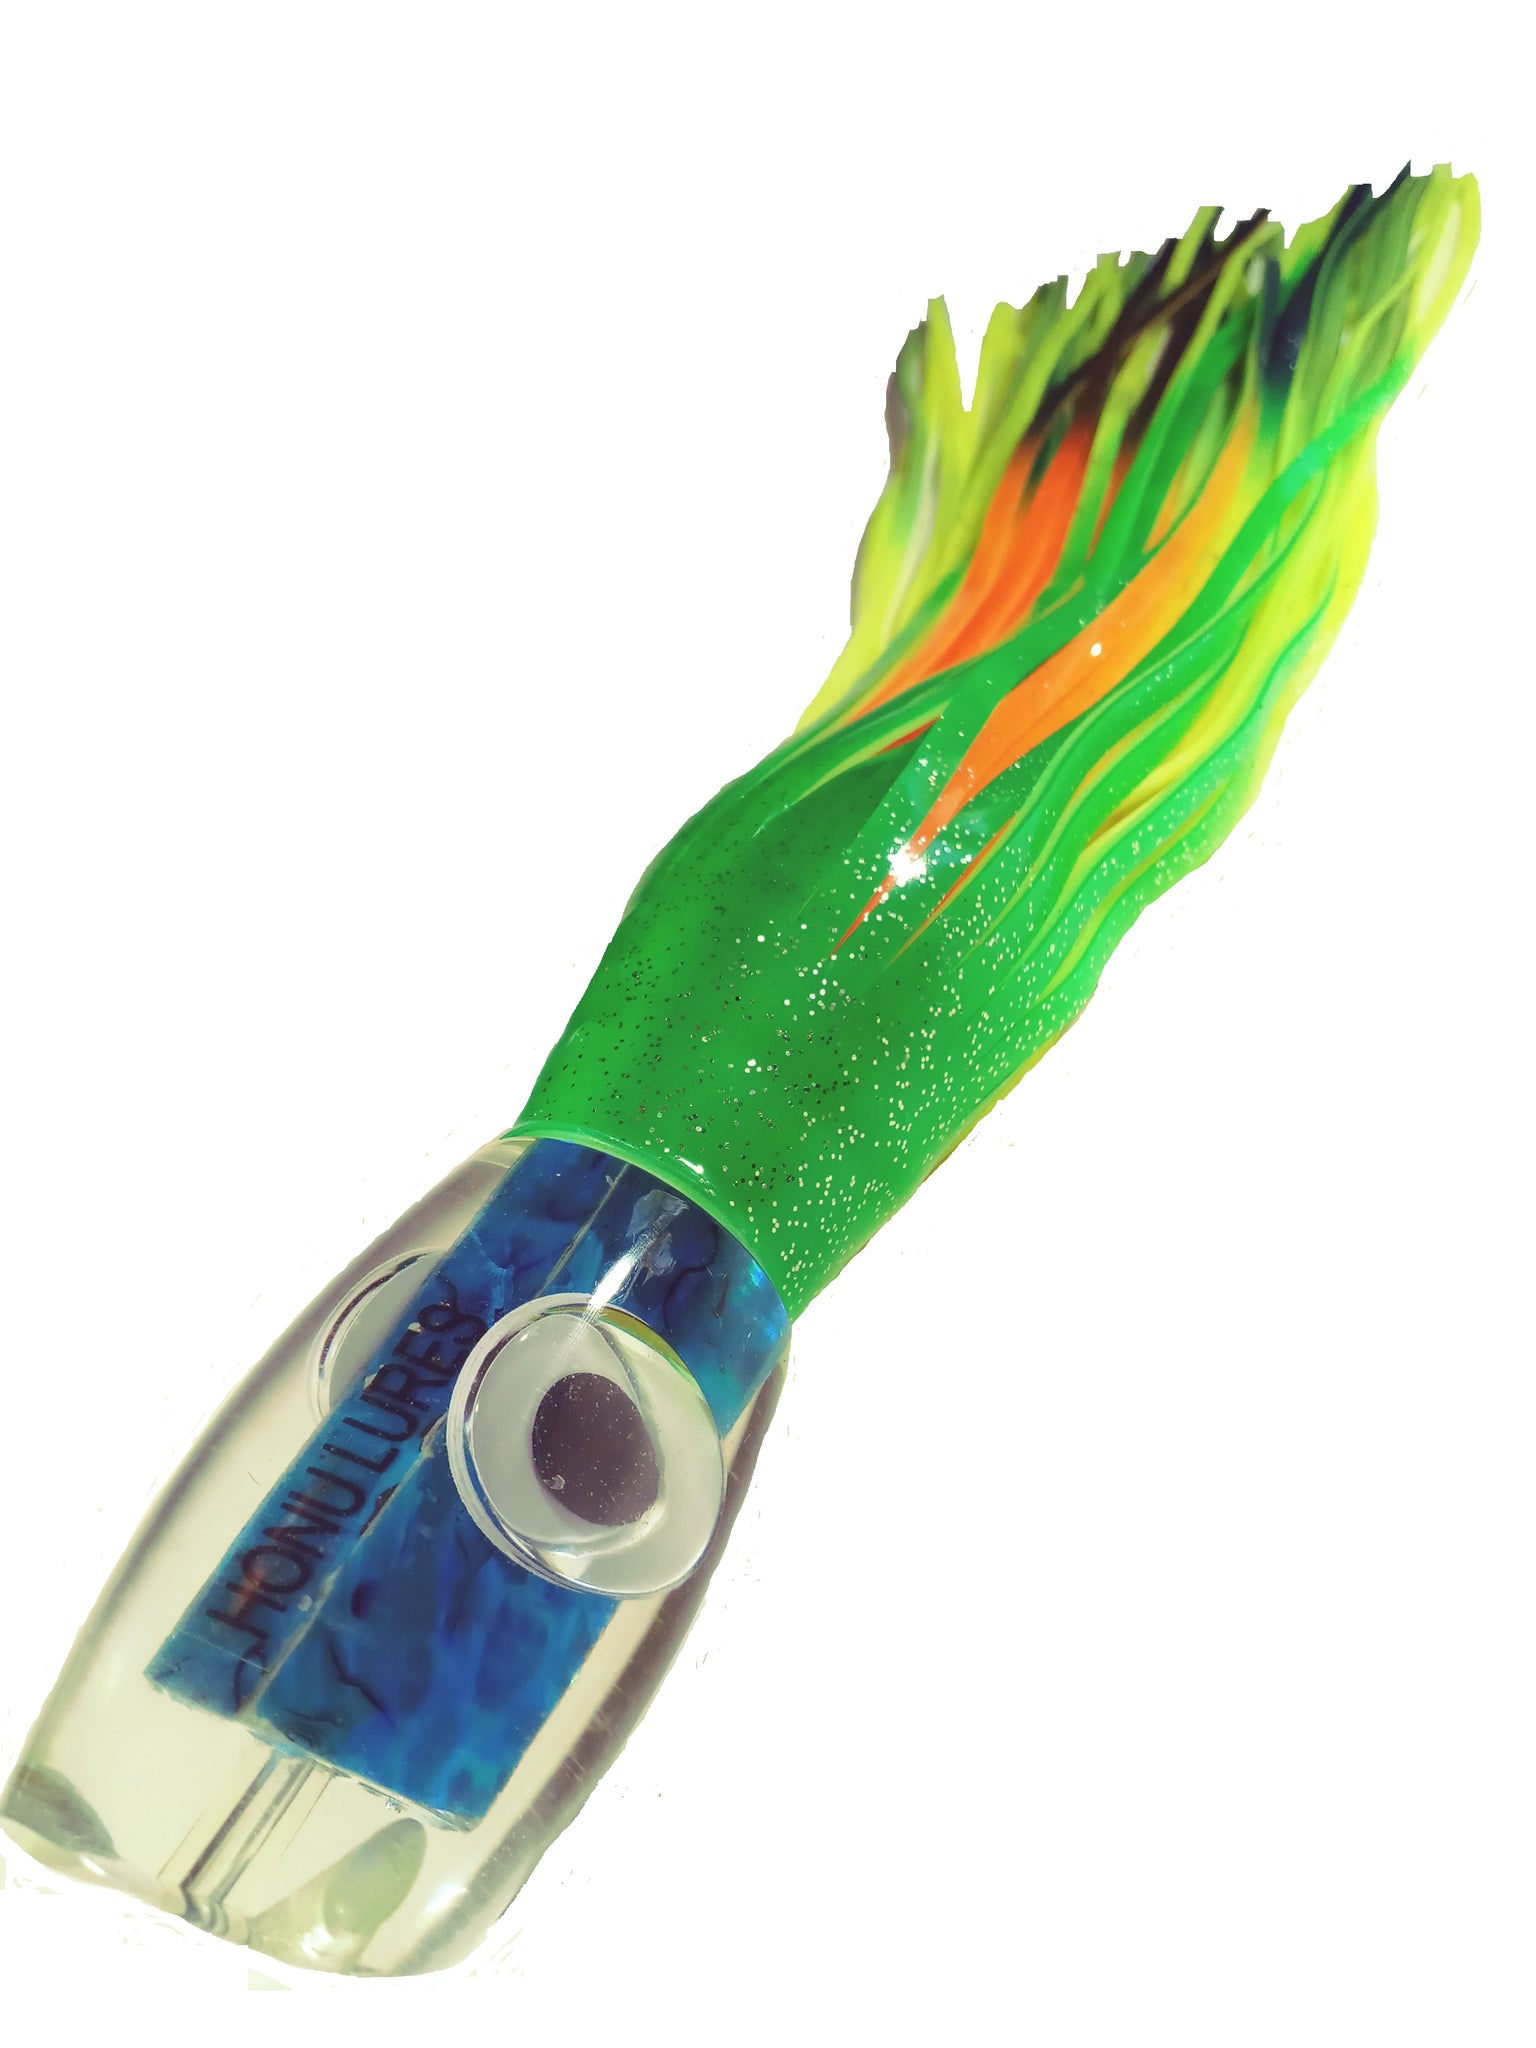 THE AB-SHELL MARLIN SALTWATER LURE UNRIGGED